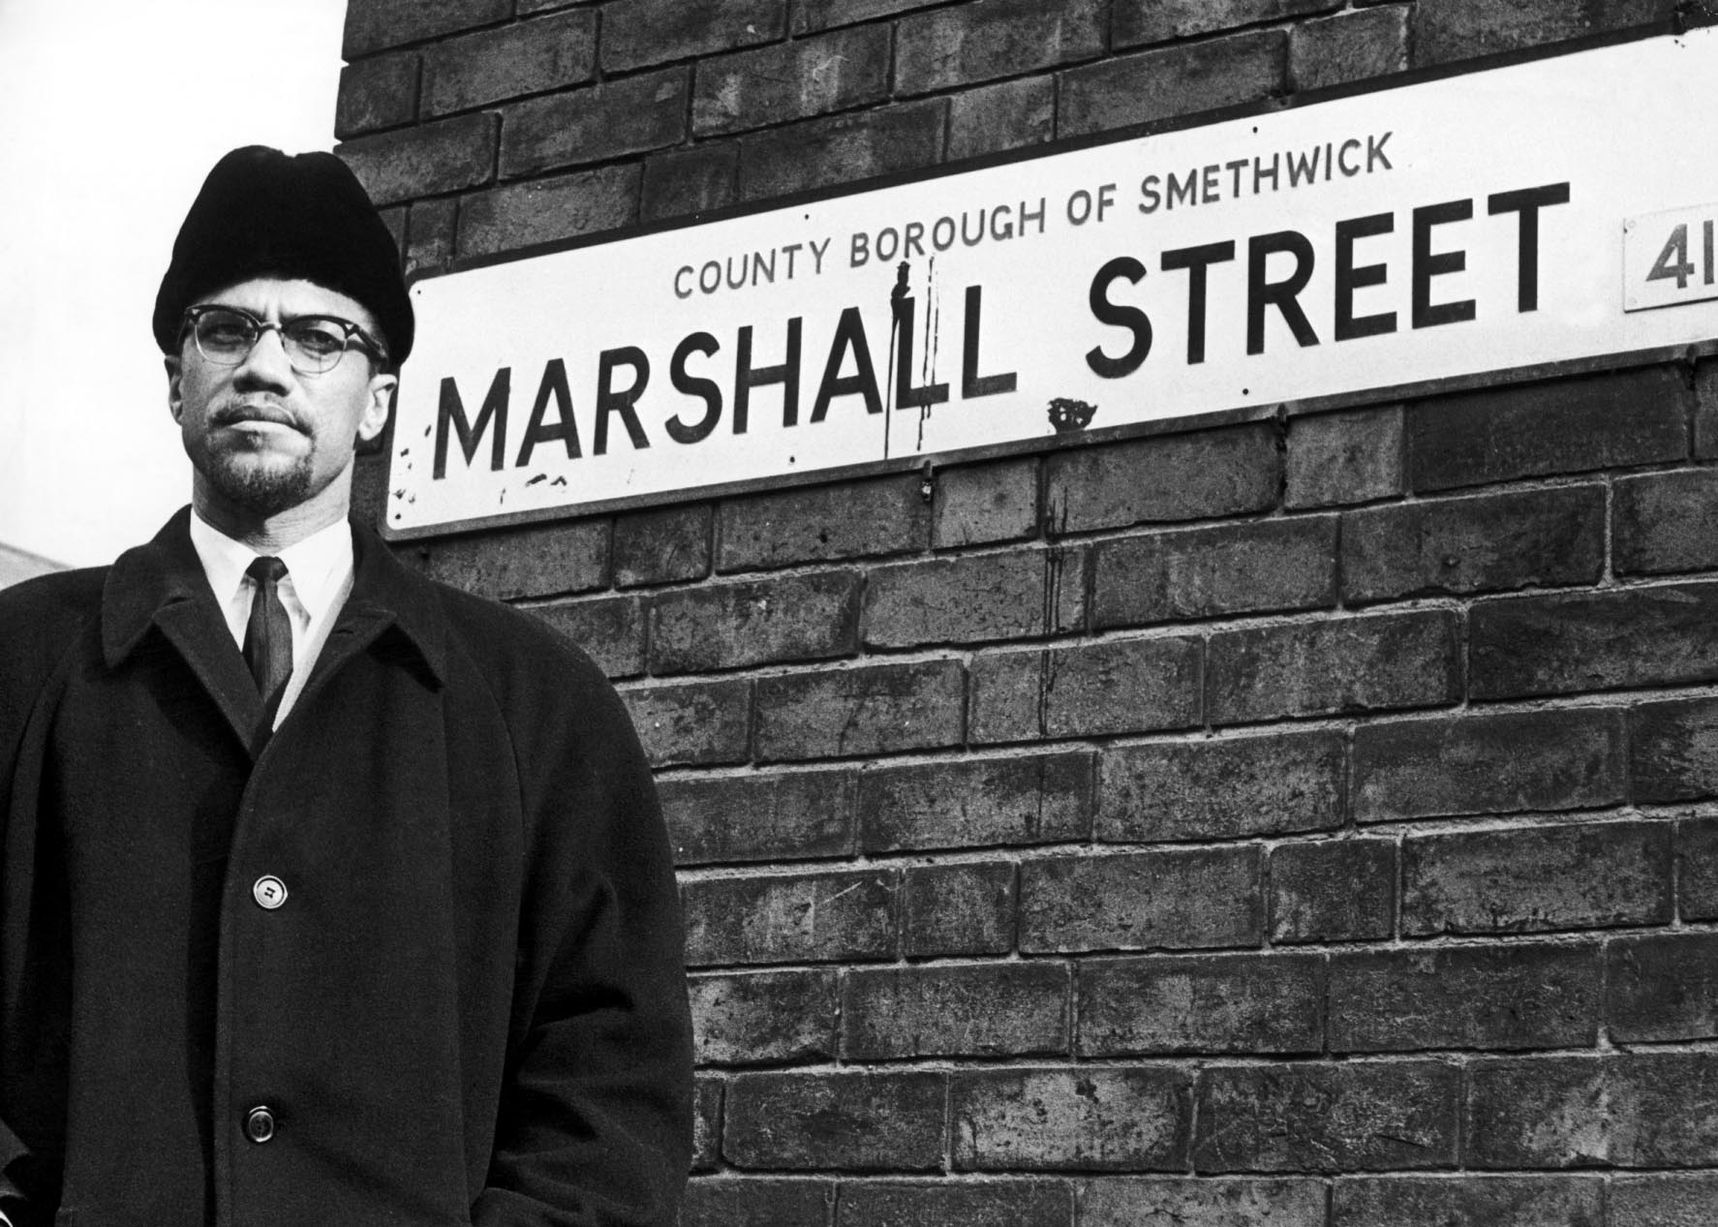 Malcolm X visits Smethwick at the invitation of the Indian Workers’ Association